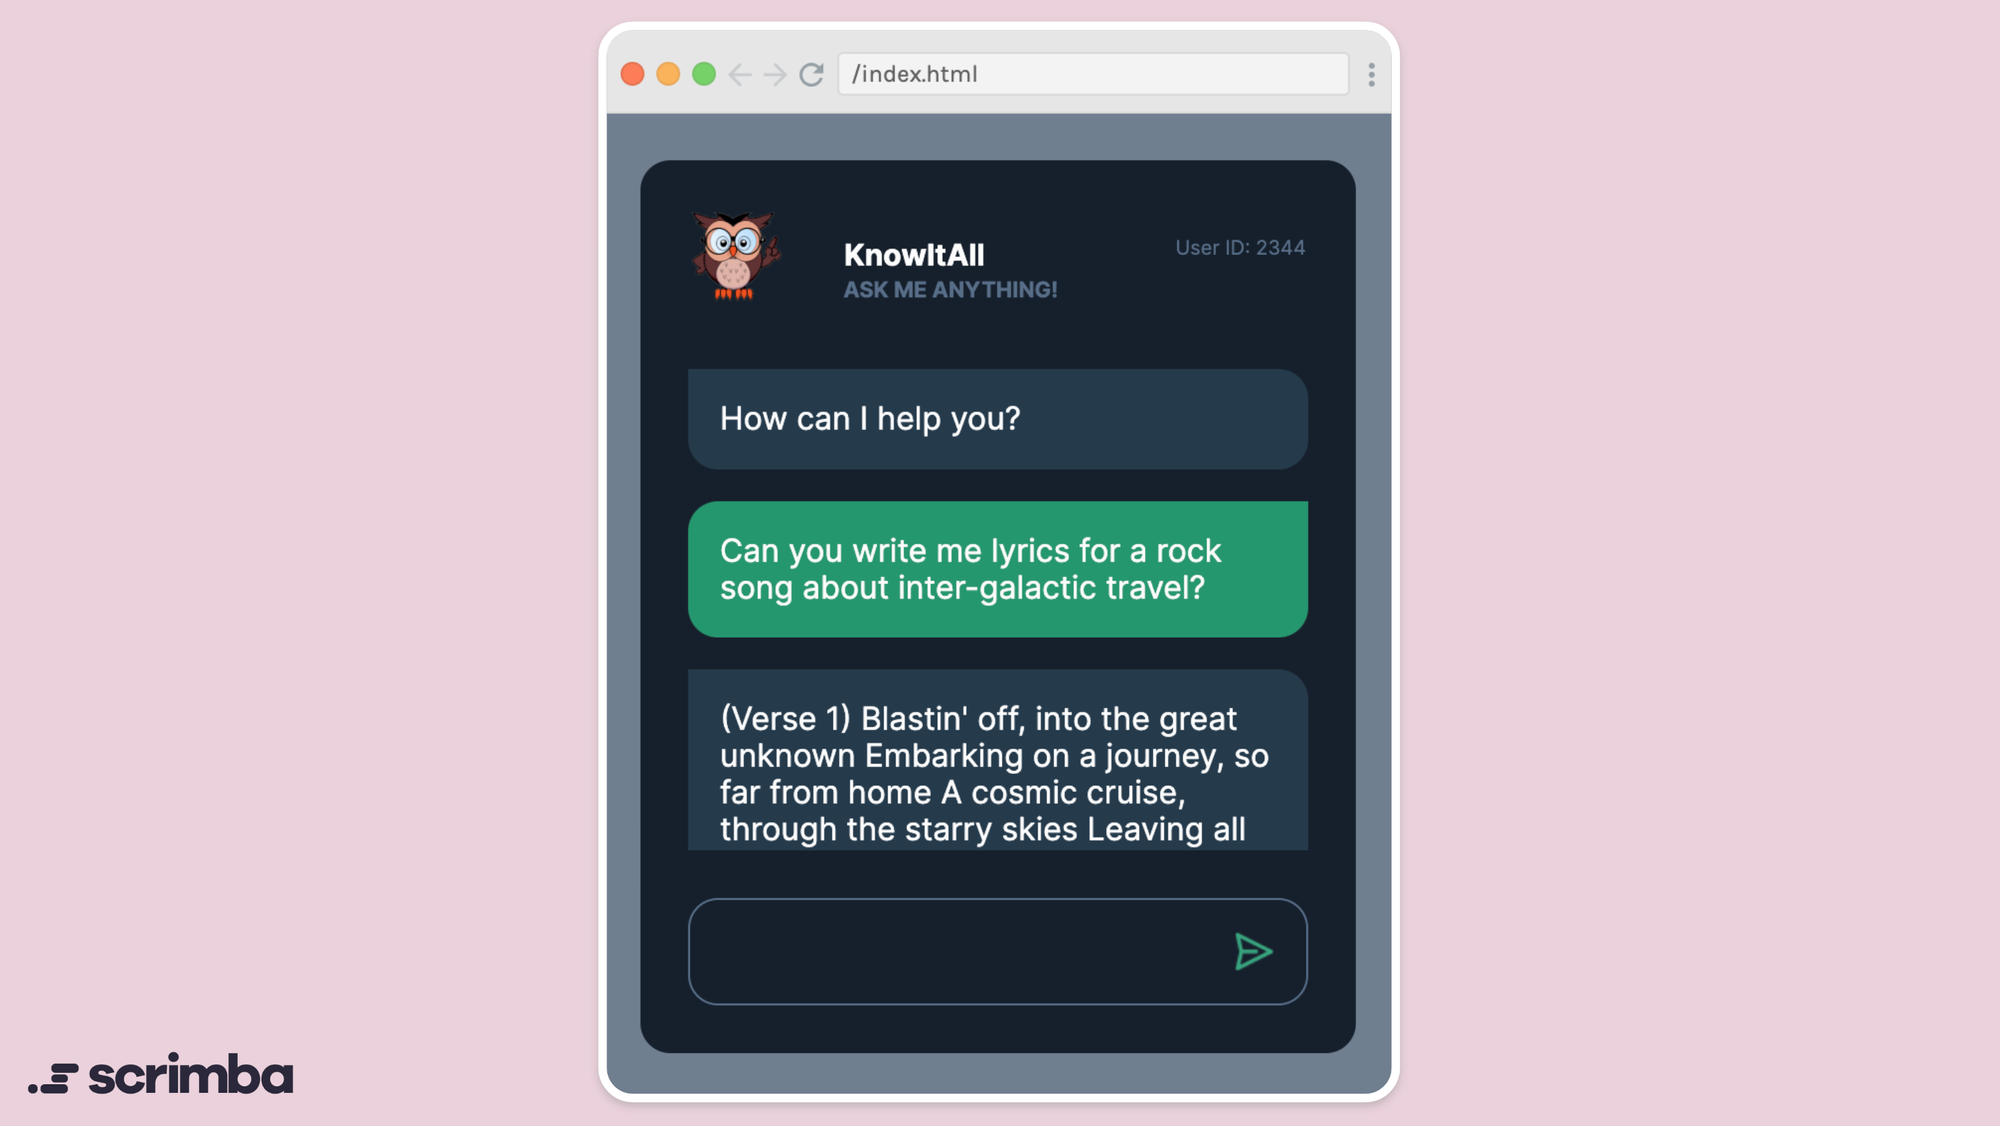 The finished app with a conversation between a user and the AI chatbot